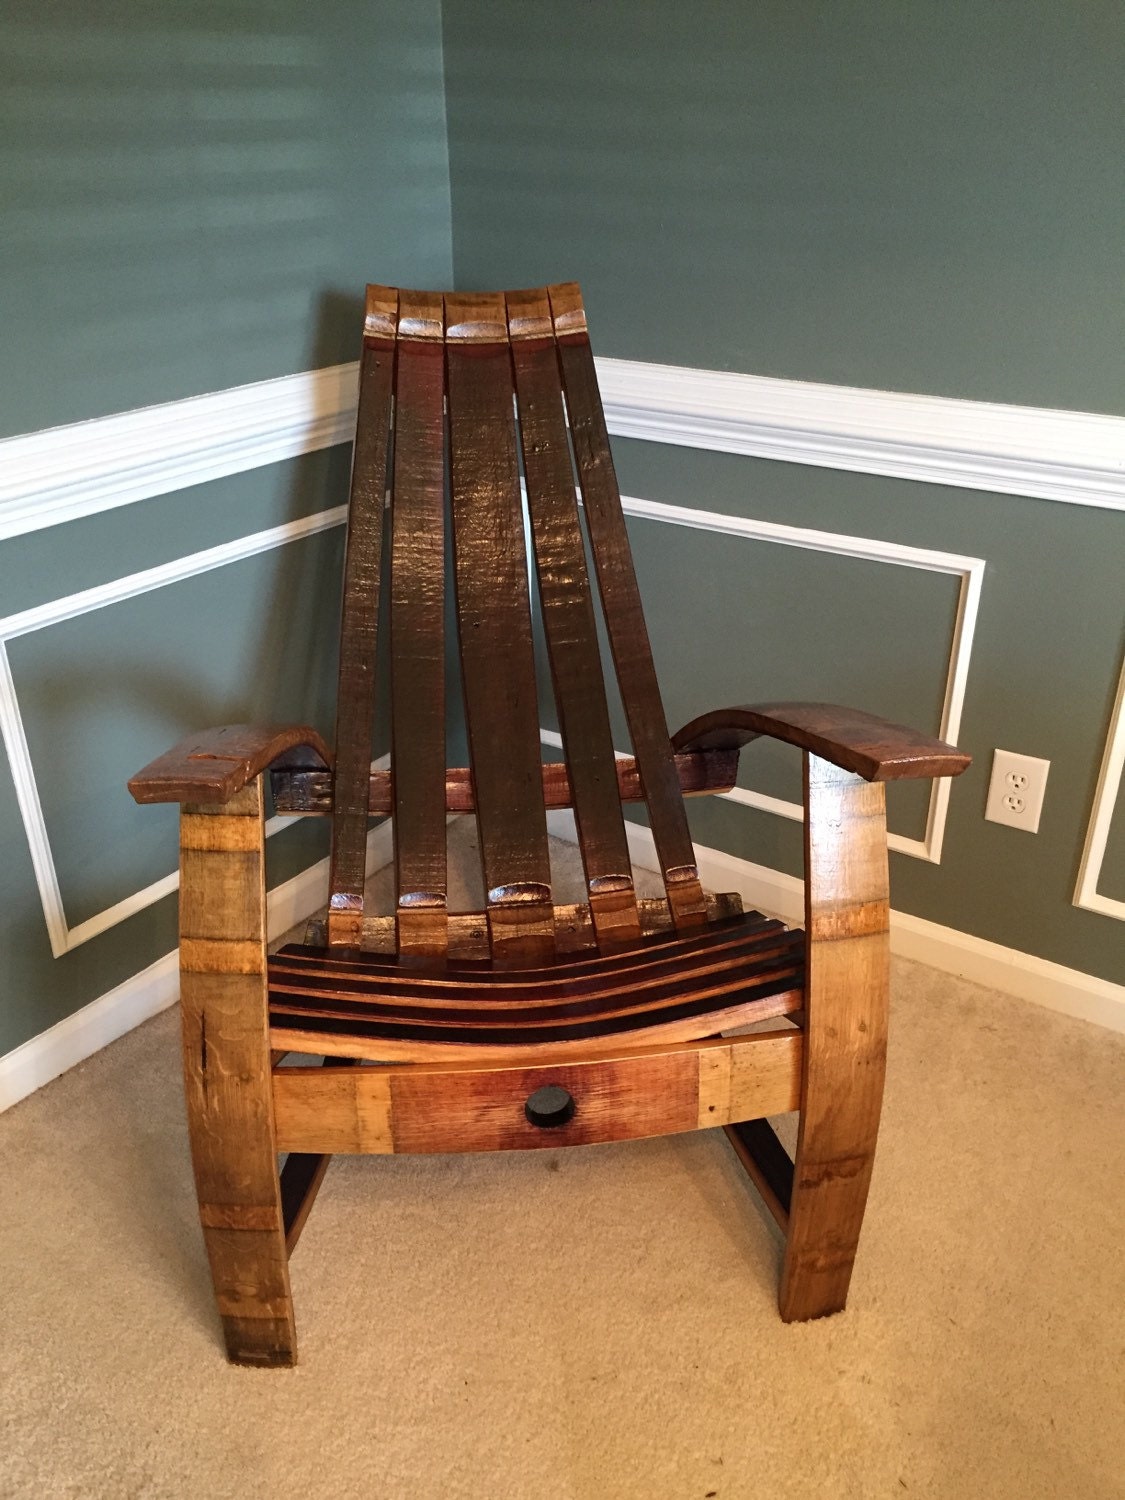 Red Wine Barrel Adirondack Chair Kit by WineOChairCo on Etsy